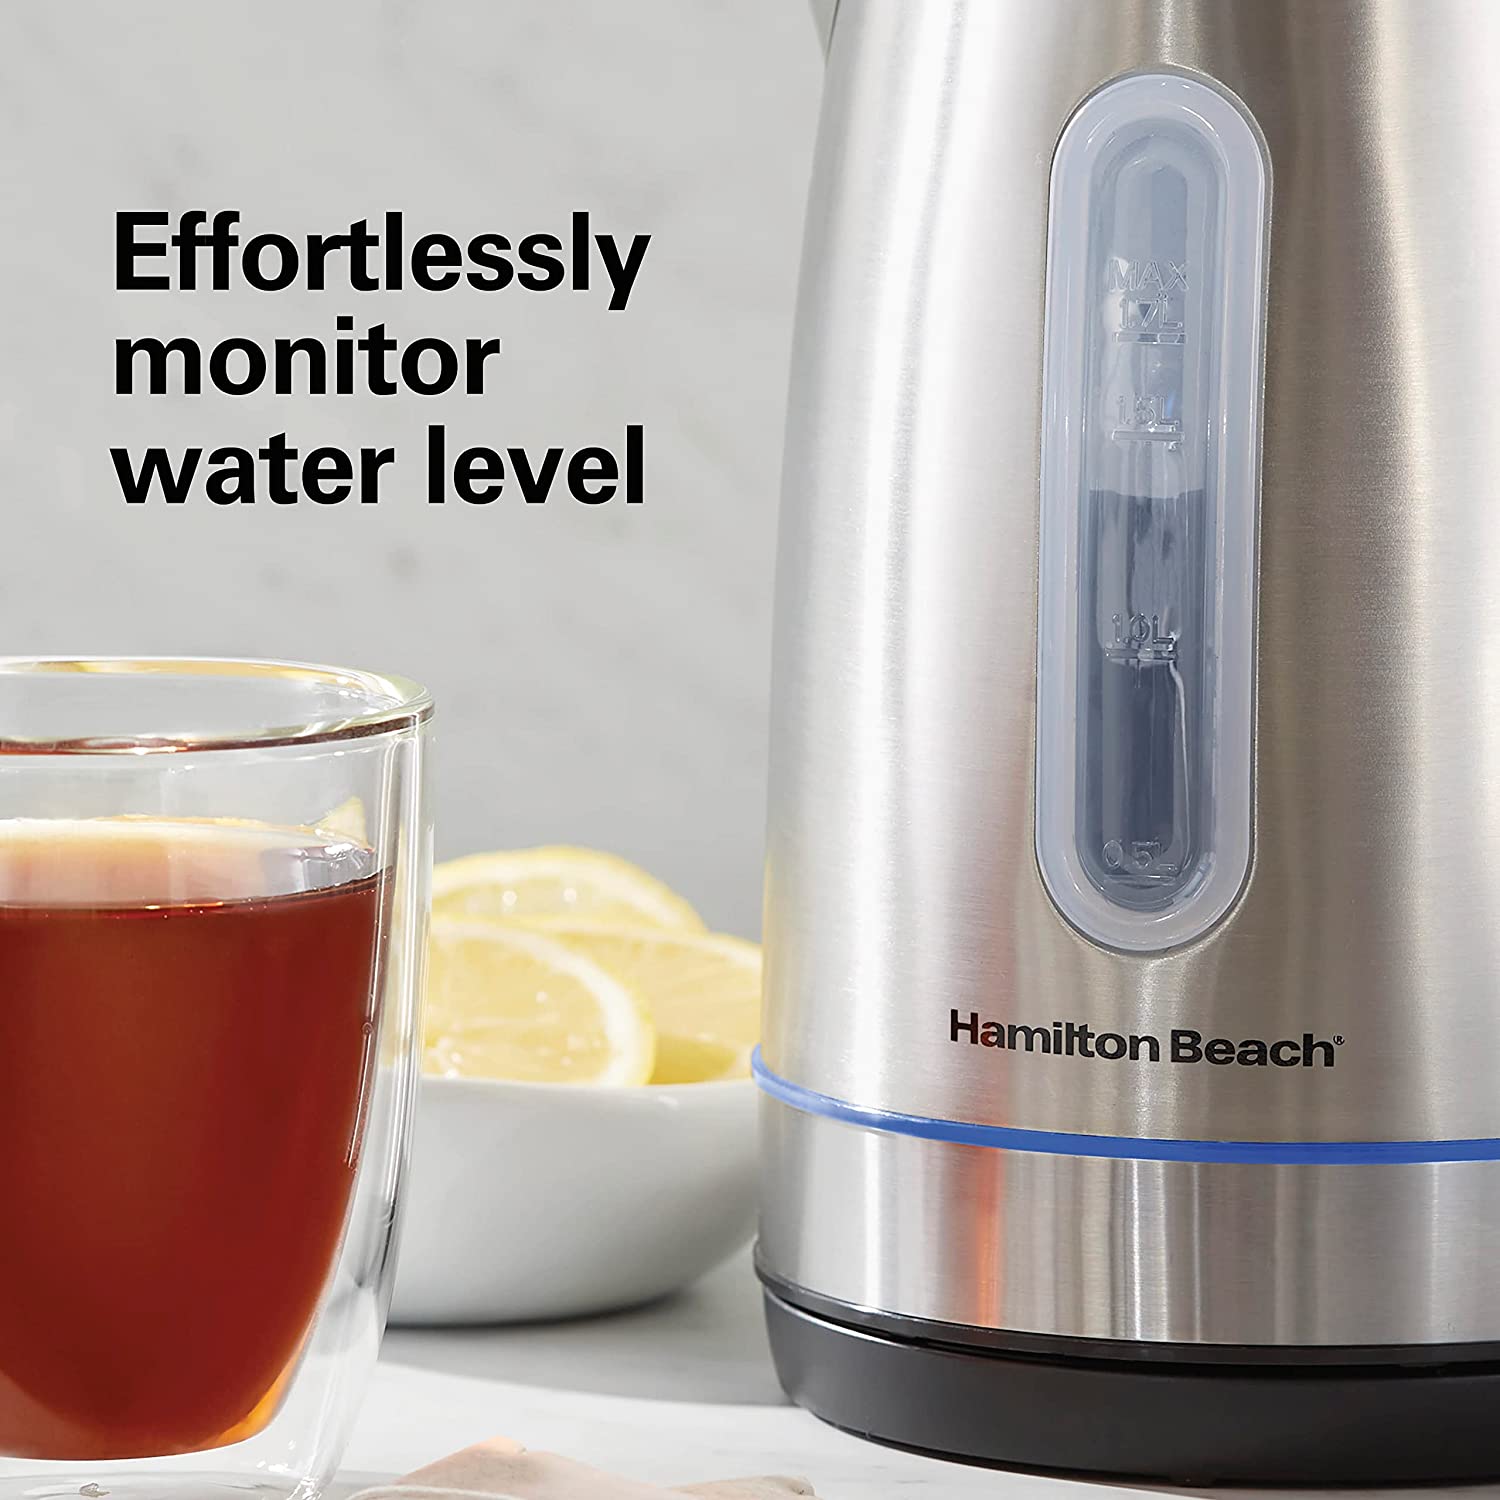 https://bigbigmart.com/wp-content/uploads/2023/07/Hamilton-Beach-Electric-Tea-Kettle-Water-Boiler-Heater-1.7-Liter-Cordless-Serving-1500-Watts-for-Fast-Boiling-Auto-Shutoff-and-Boil-Dry-Protection-Stainless-Steel-with-LED-Light-Ring-410376.jpg